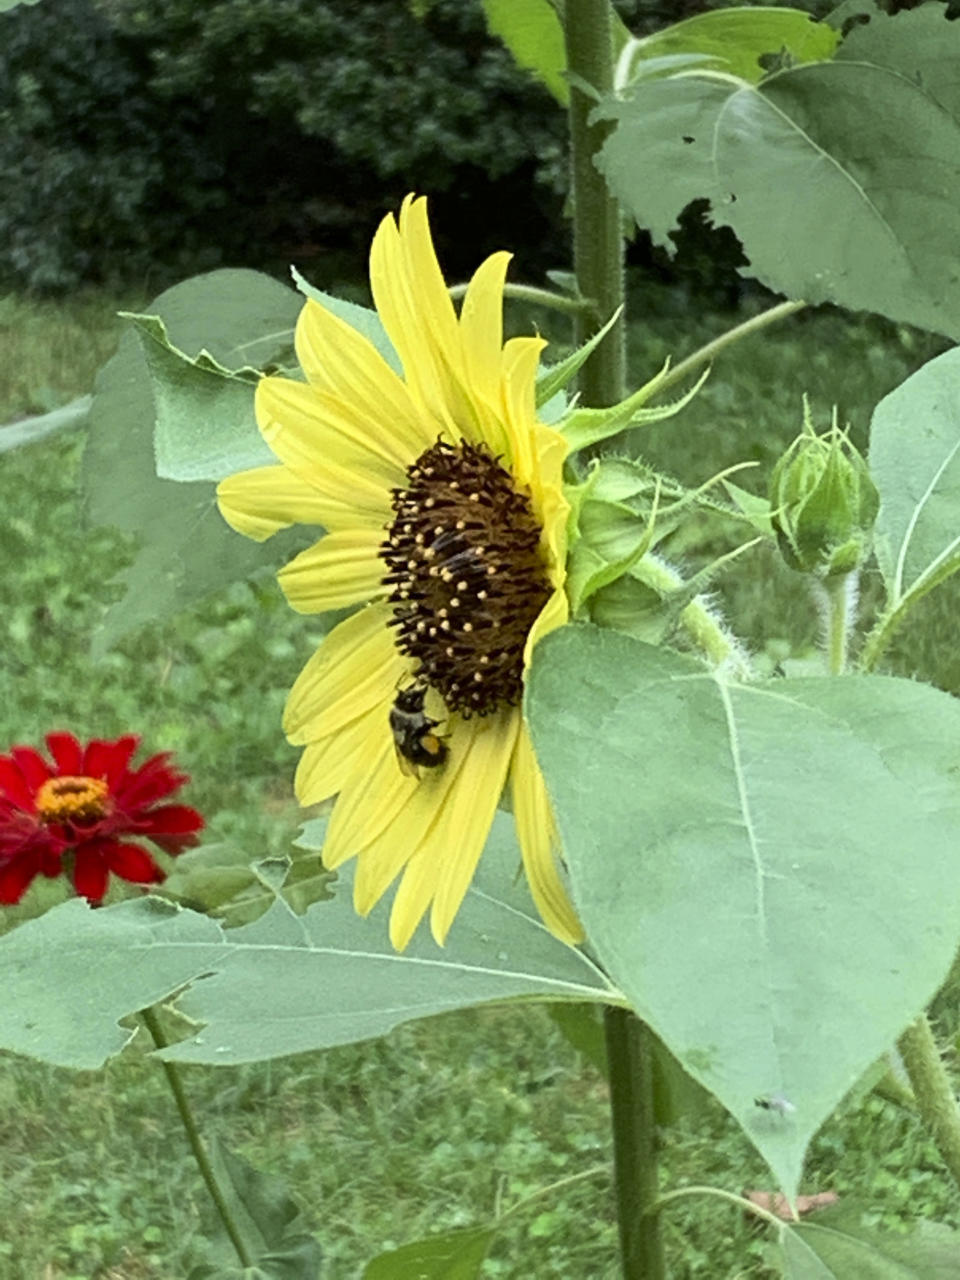 A bee settles on a sunflower in a yard in Westchester County, N.Y., in 2021. Many people are converting parts of their grass lawns into planting beds for native plants that attract pollinators. (AP Photo/Julia Rubin)